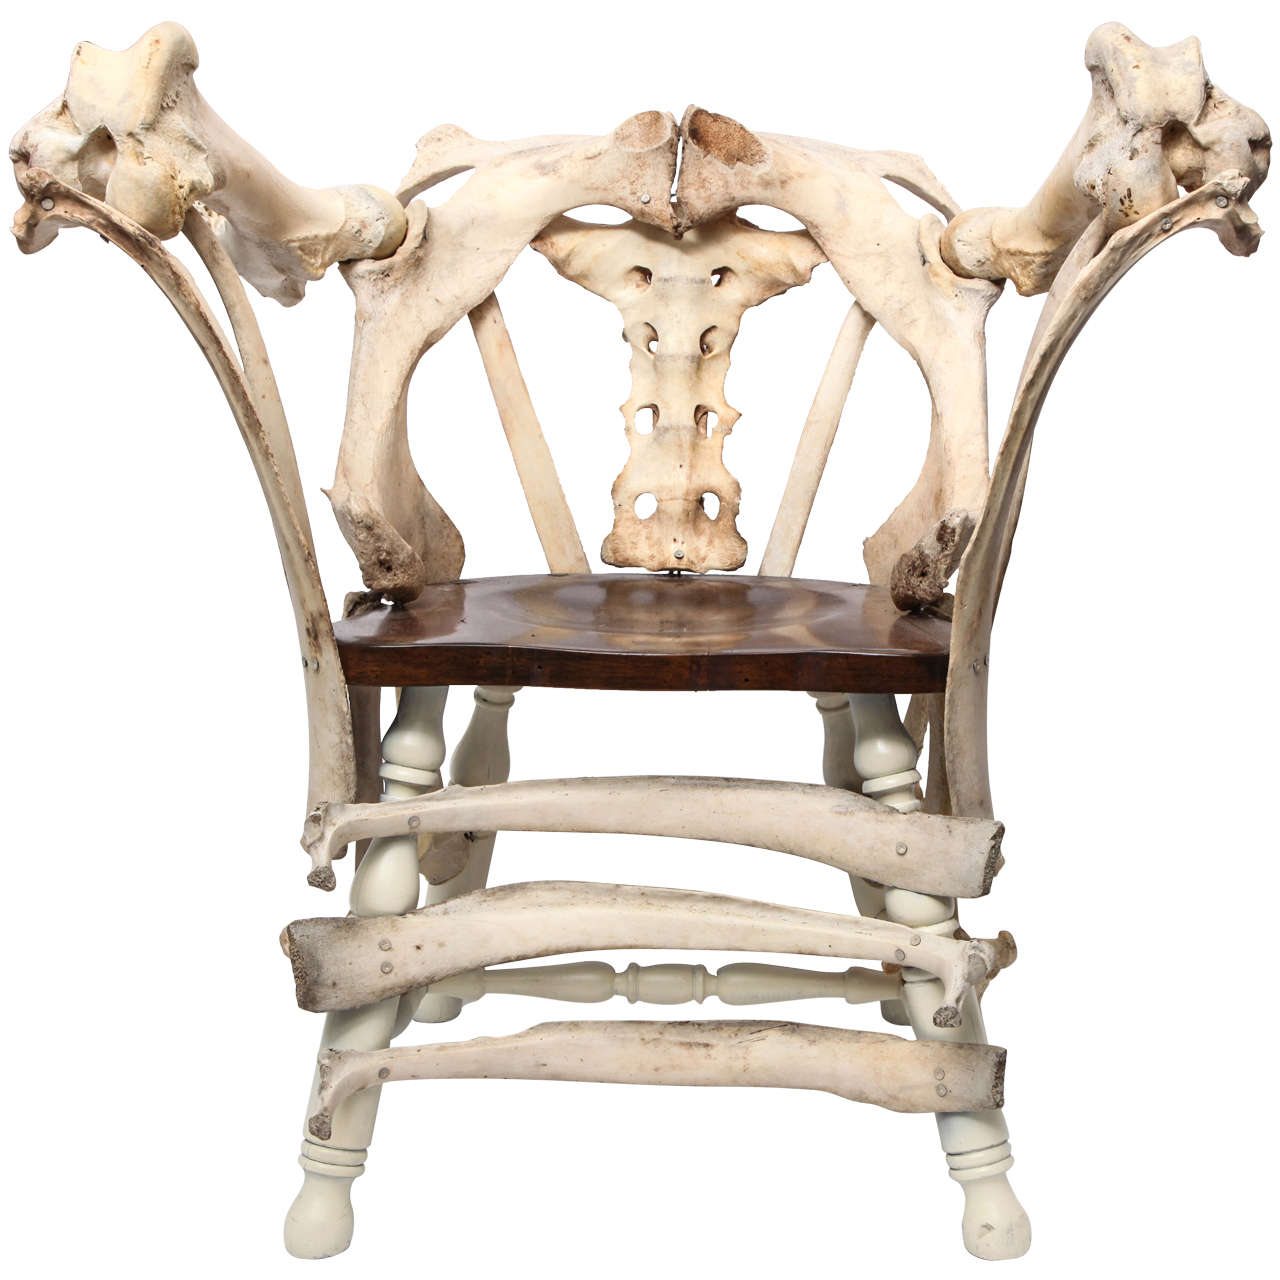 Modernist Sculptural Chair Crafted Out of Cow Bones